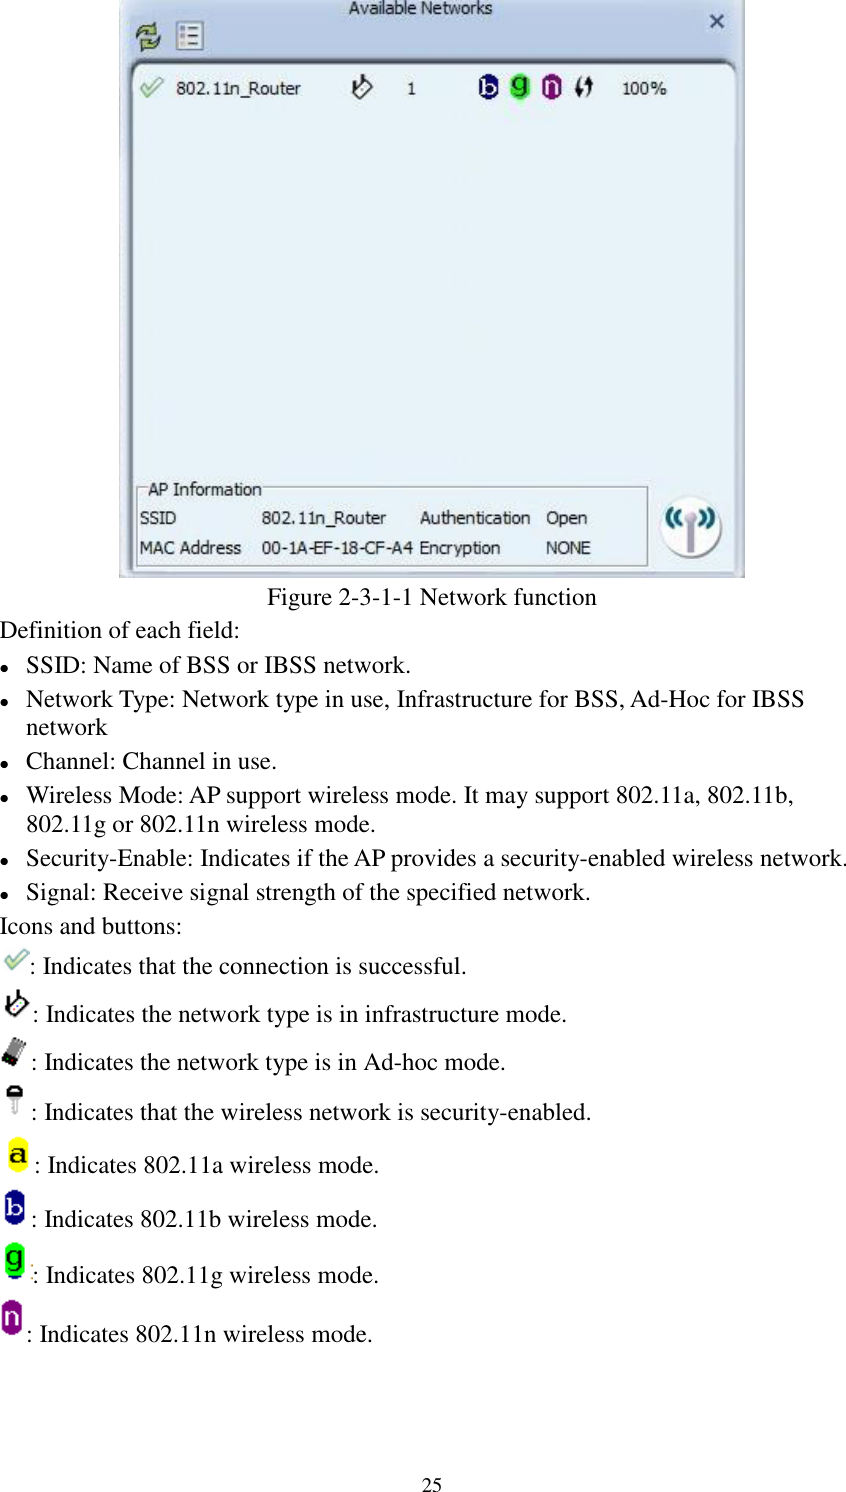 25Figure 2-3-1-1 Network functionDefinition of each field:SSID: Name of BSS or IBSS network.Network Type: Network type in use, Infrastructure for BSS, Ad-Hoc for IBSSnetworkChannel: Channel in use.Wireless Mode: AP support wireless mode. It may support 802.11a, 802.11b,802.11g or 802.11n wireless mode.Security-Enable: Indicates if the AP provides a security-enabled wireless network.Signal: Receive signal strength of the specified network.Icons and buttons:: Indicates that the connection is successful.: Indicates the network type is in infrastructure mode.: Indicates the network type is in Ad-hoc mode.: Indicates that the wireless network is security-enabled.: Indicates 802.11a wireless mode.: Indicates 802.11b wireless mode.: Indicates 802.11g wireless mode.: Indicates 802.11n wireless mode.